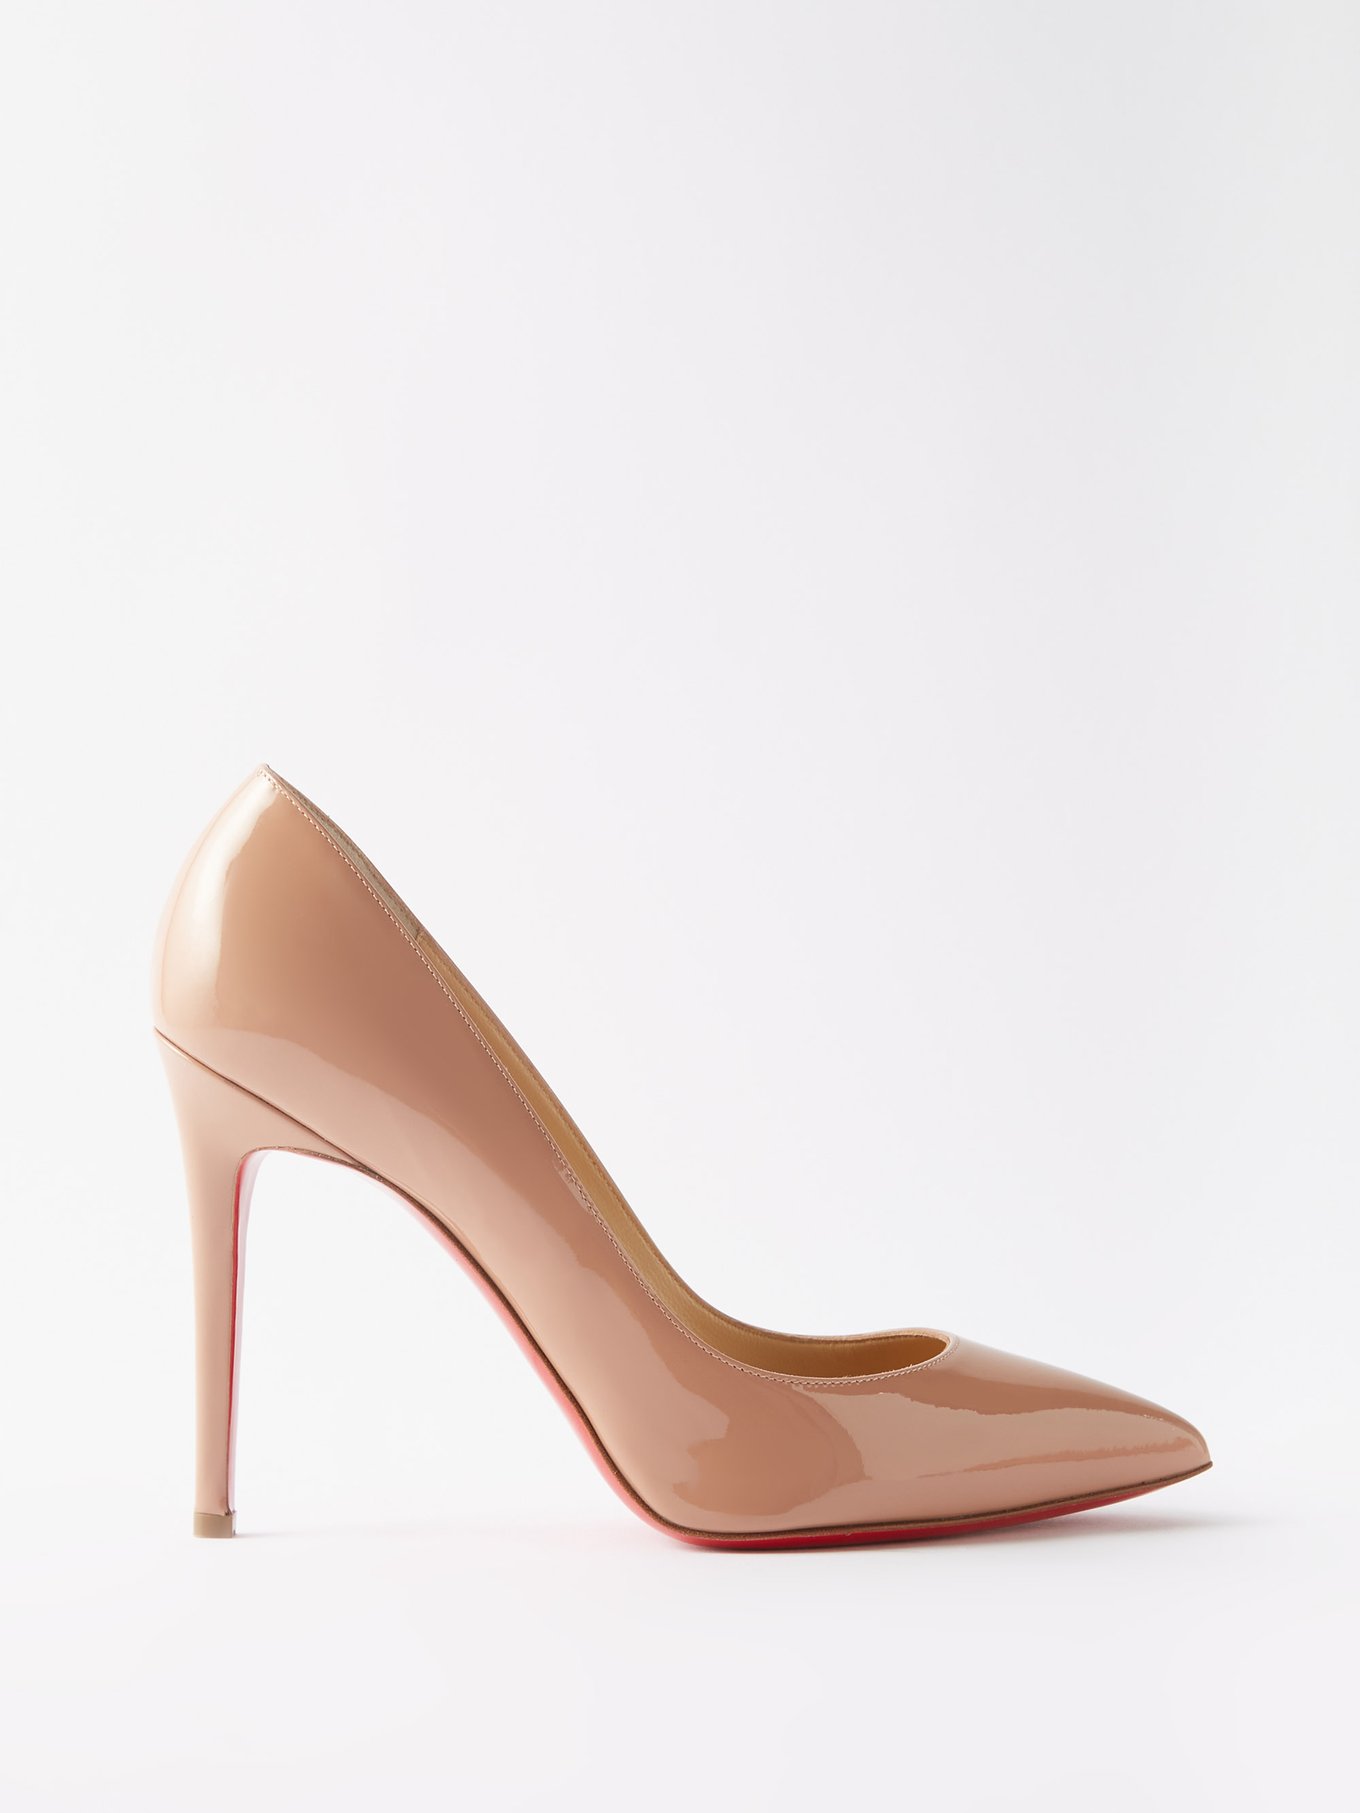 Pigalle 100 patent-leather pumps | Christian Louboutin